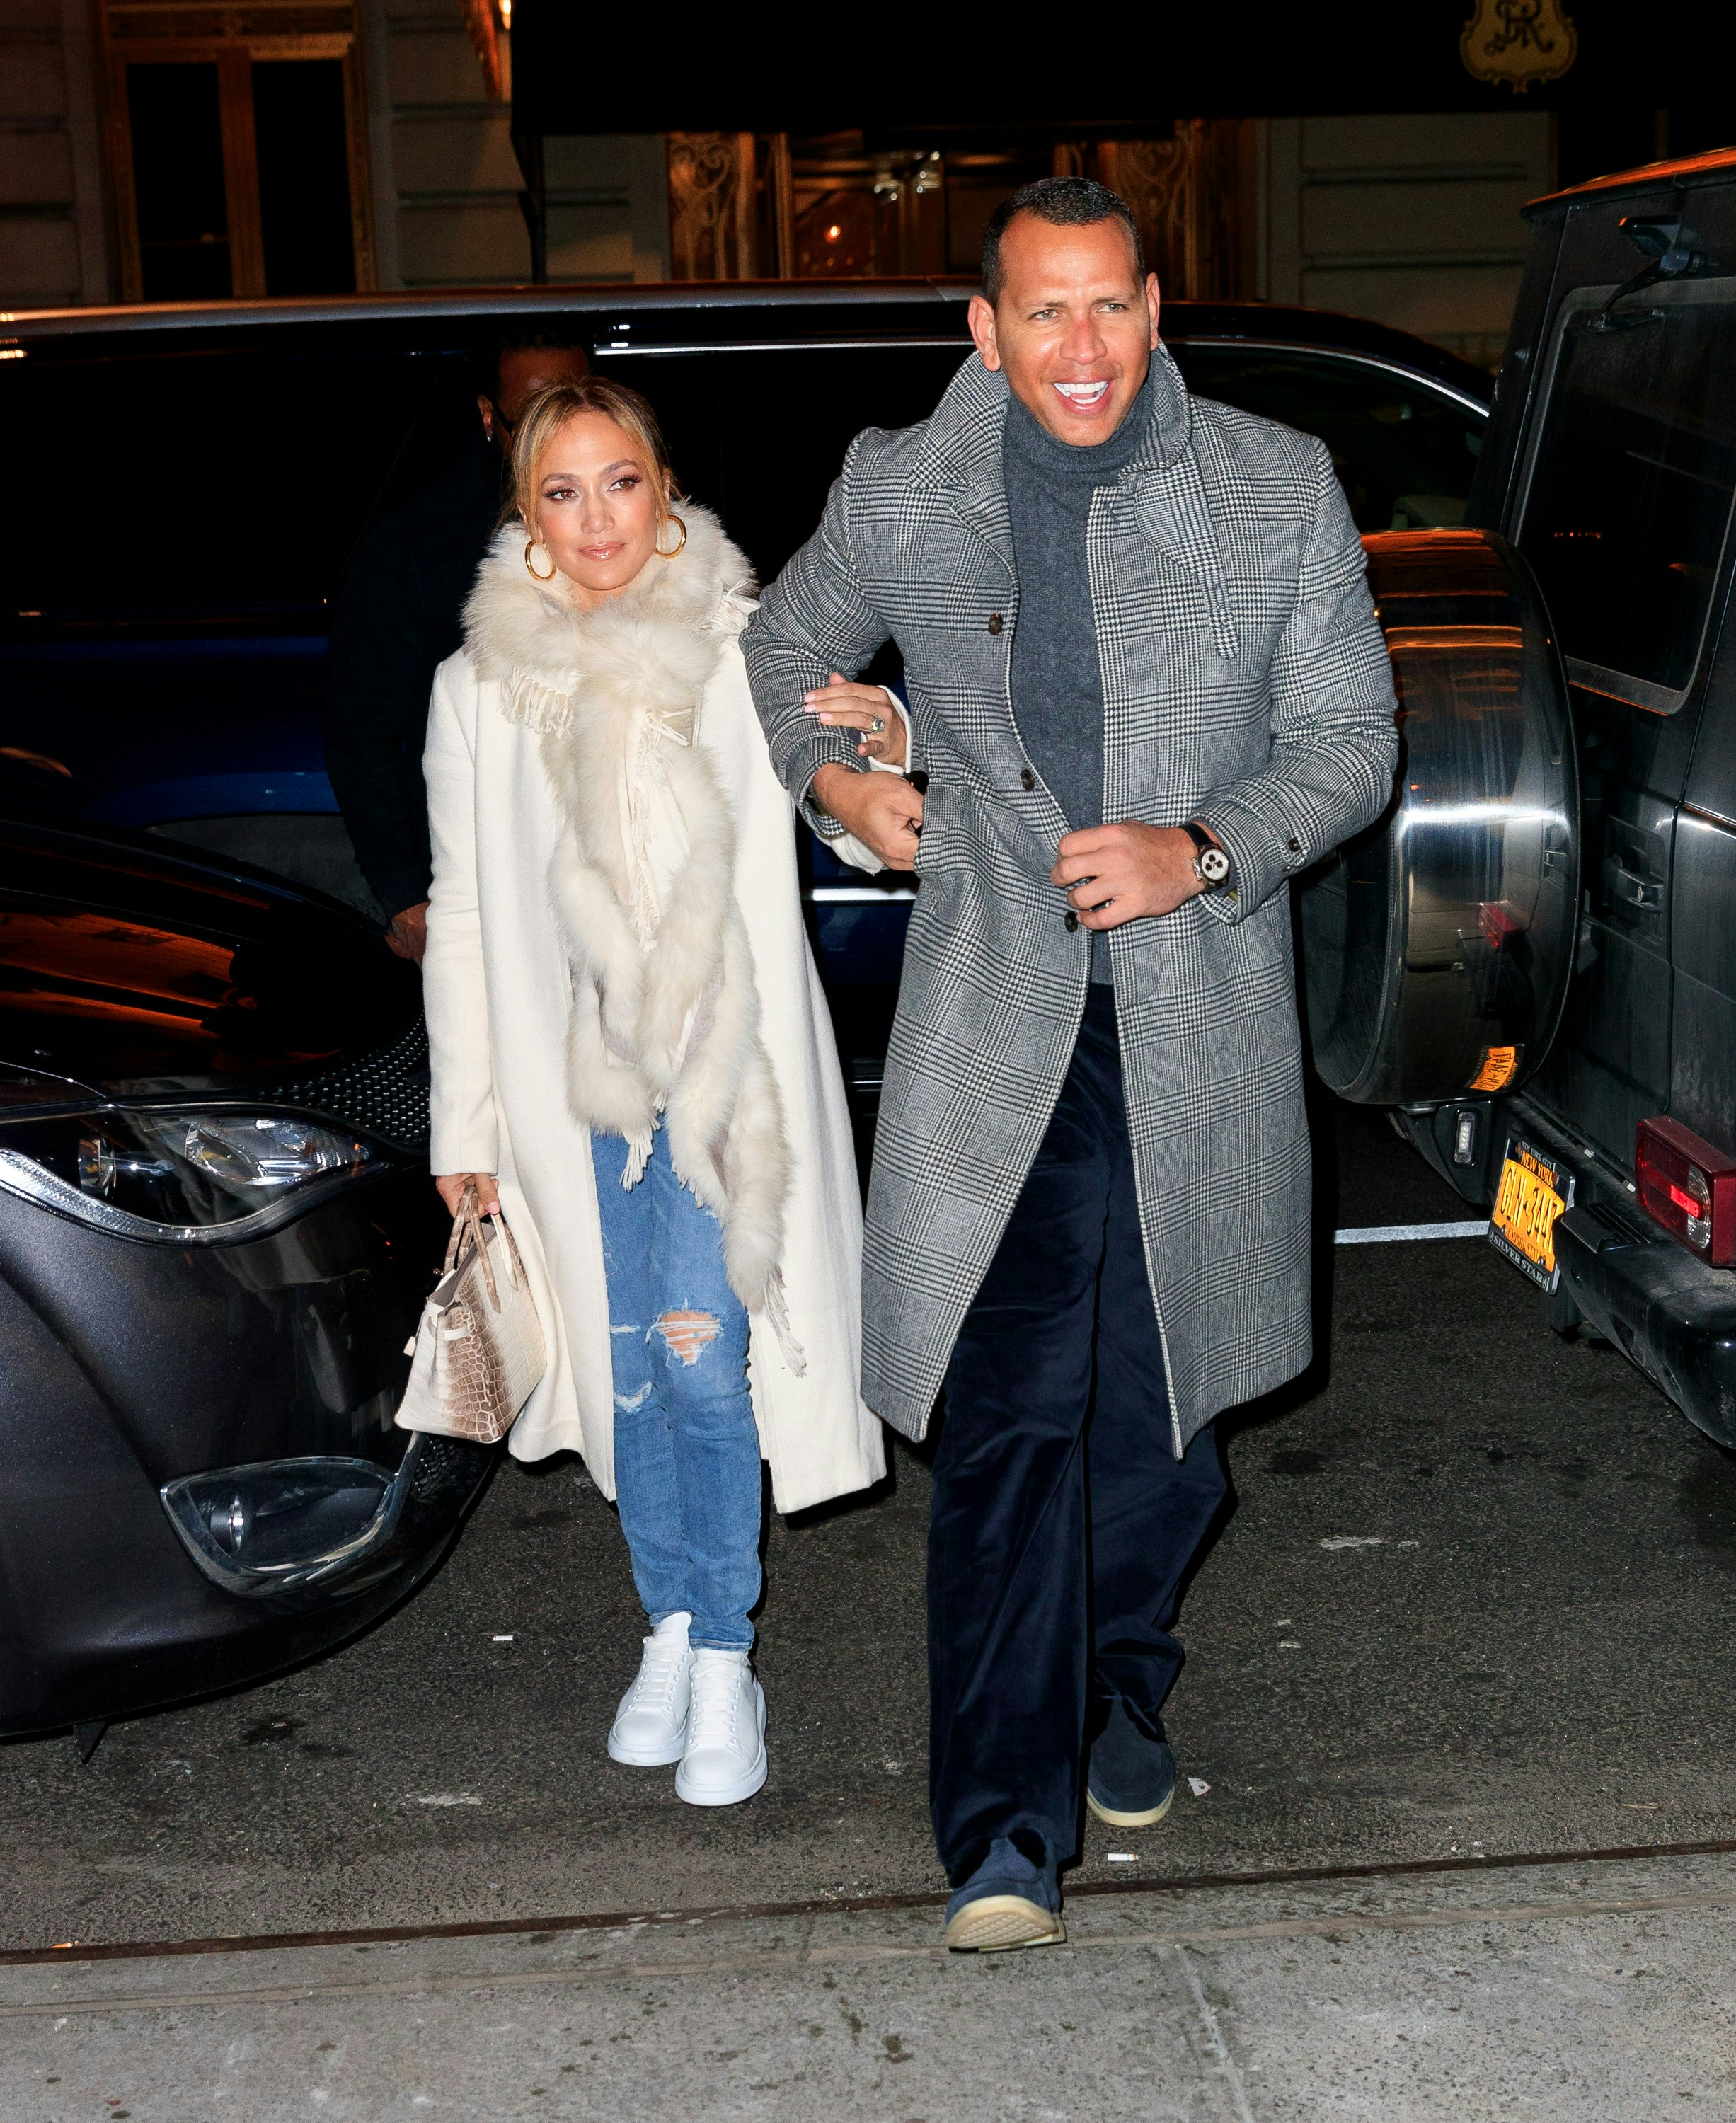 Jennifer Lopez and Alex Rodriguez walk arm-in-arm between parked cars.